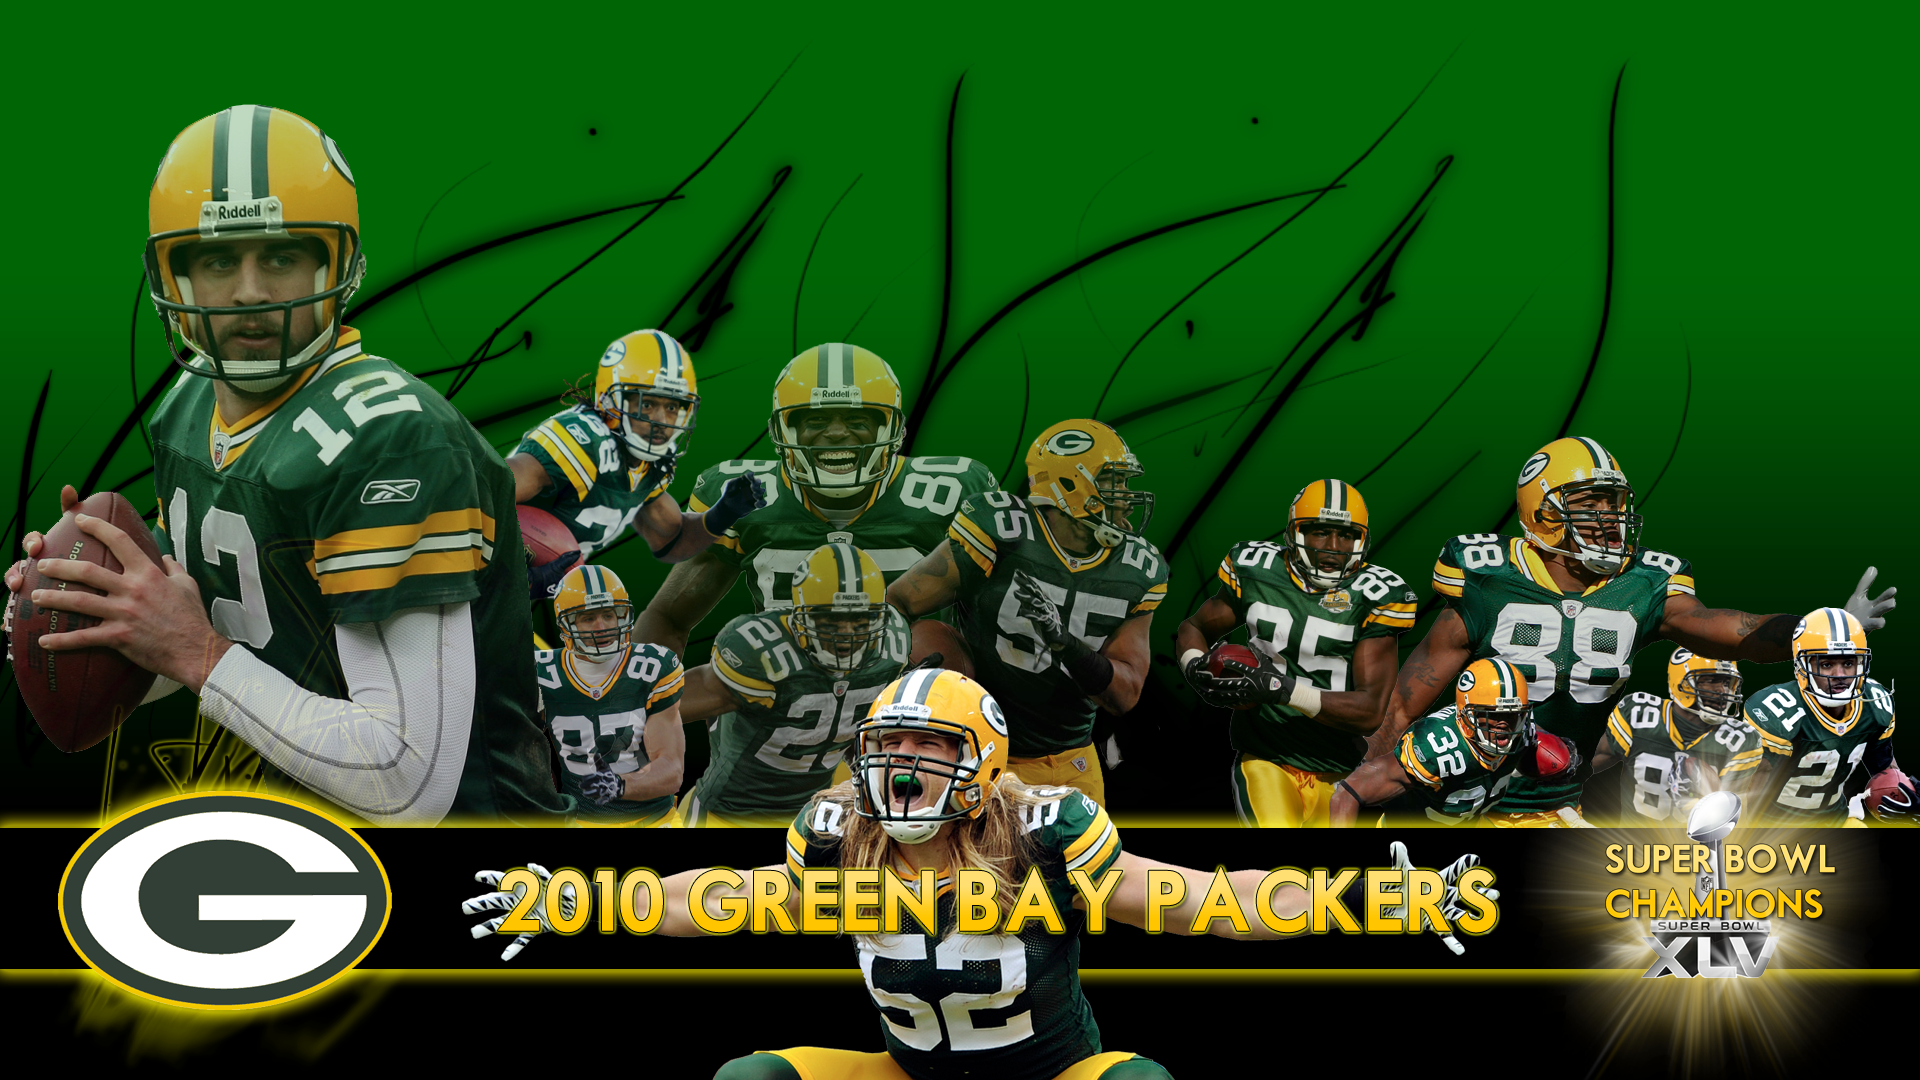 Green Bay Packers Wallpaper Hd - Aaron Rodgers Green Bay Packers Quarterback Artwork , HD Wallpaper & Backgrounds